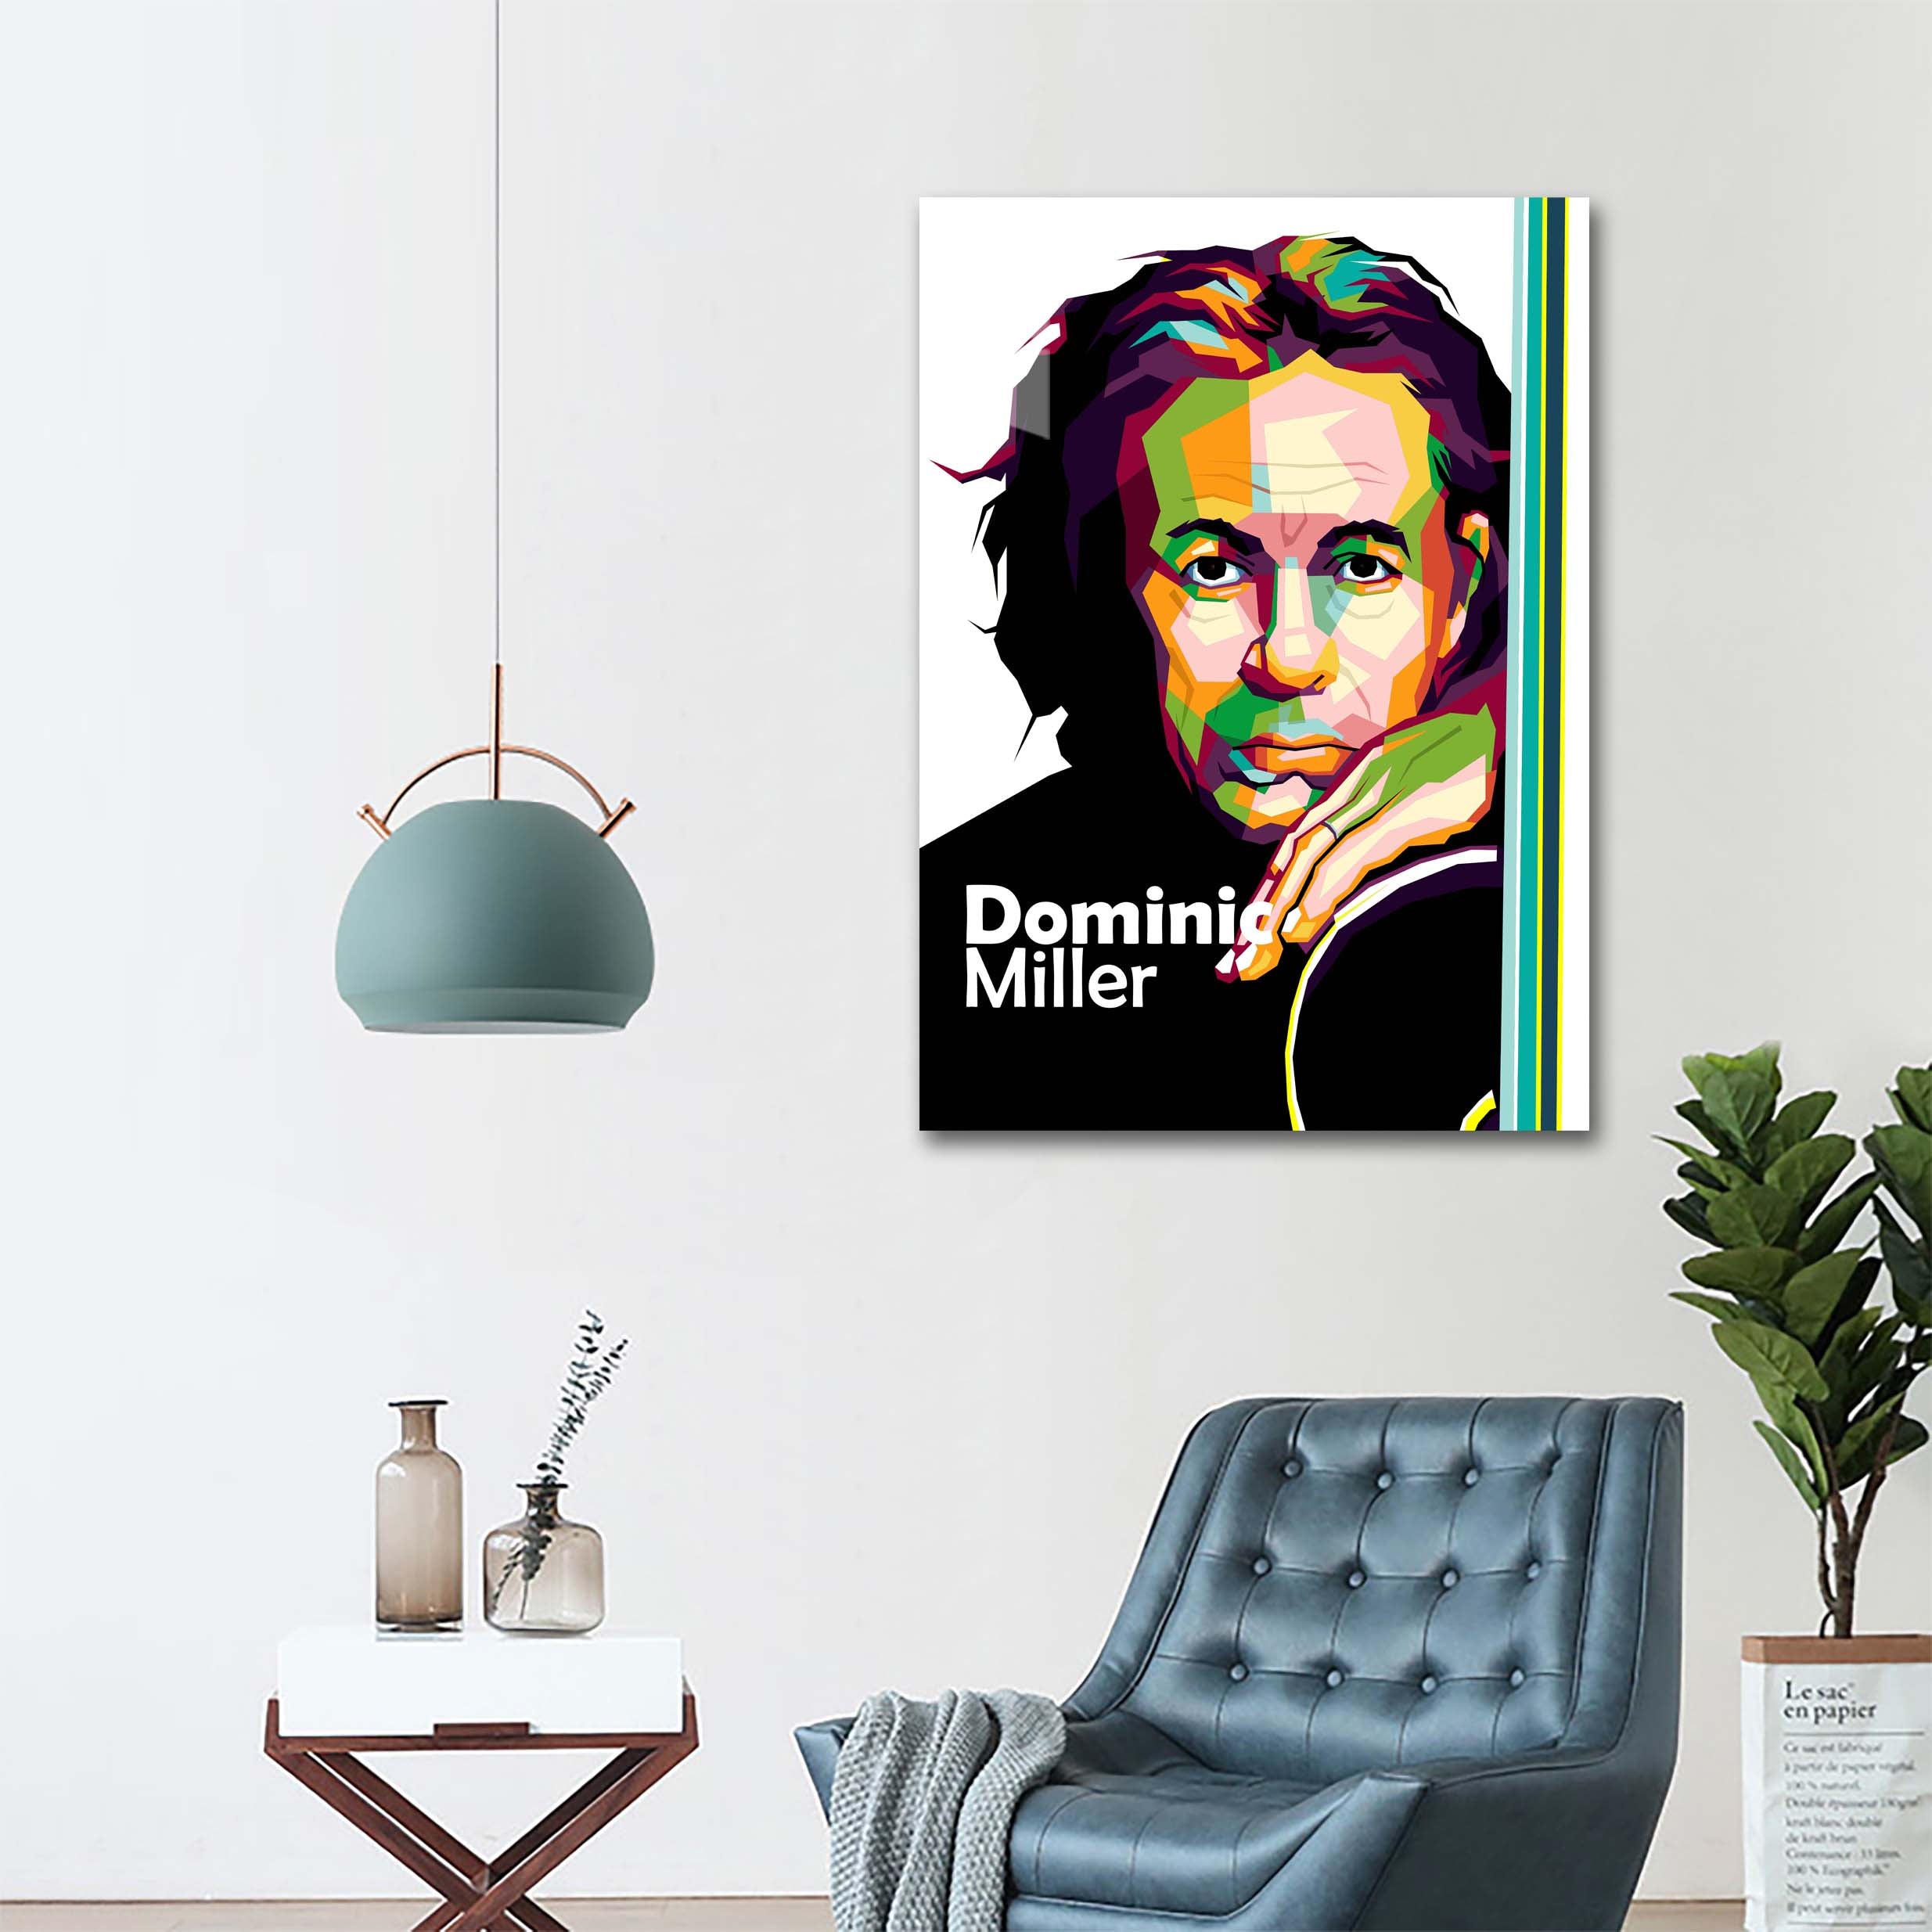 Special edition Legend music in wpap trending DOMINIC MILLER-designed by @Amirudin kosong enam